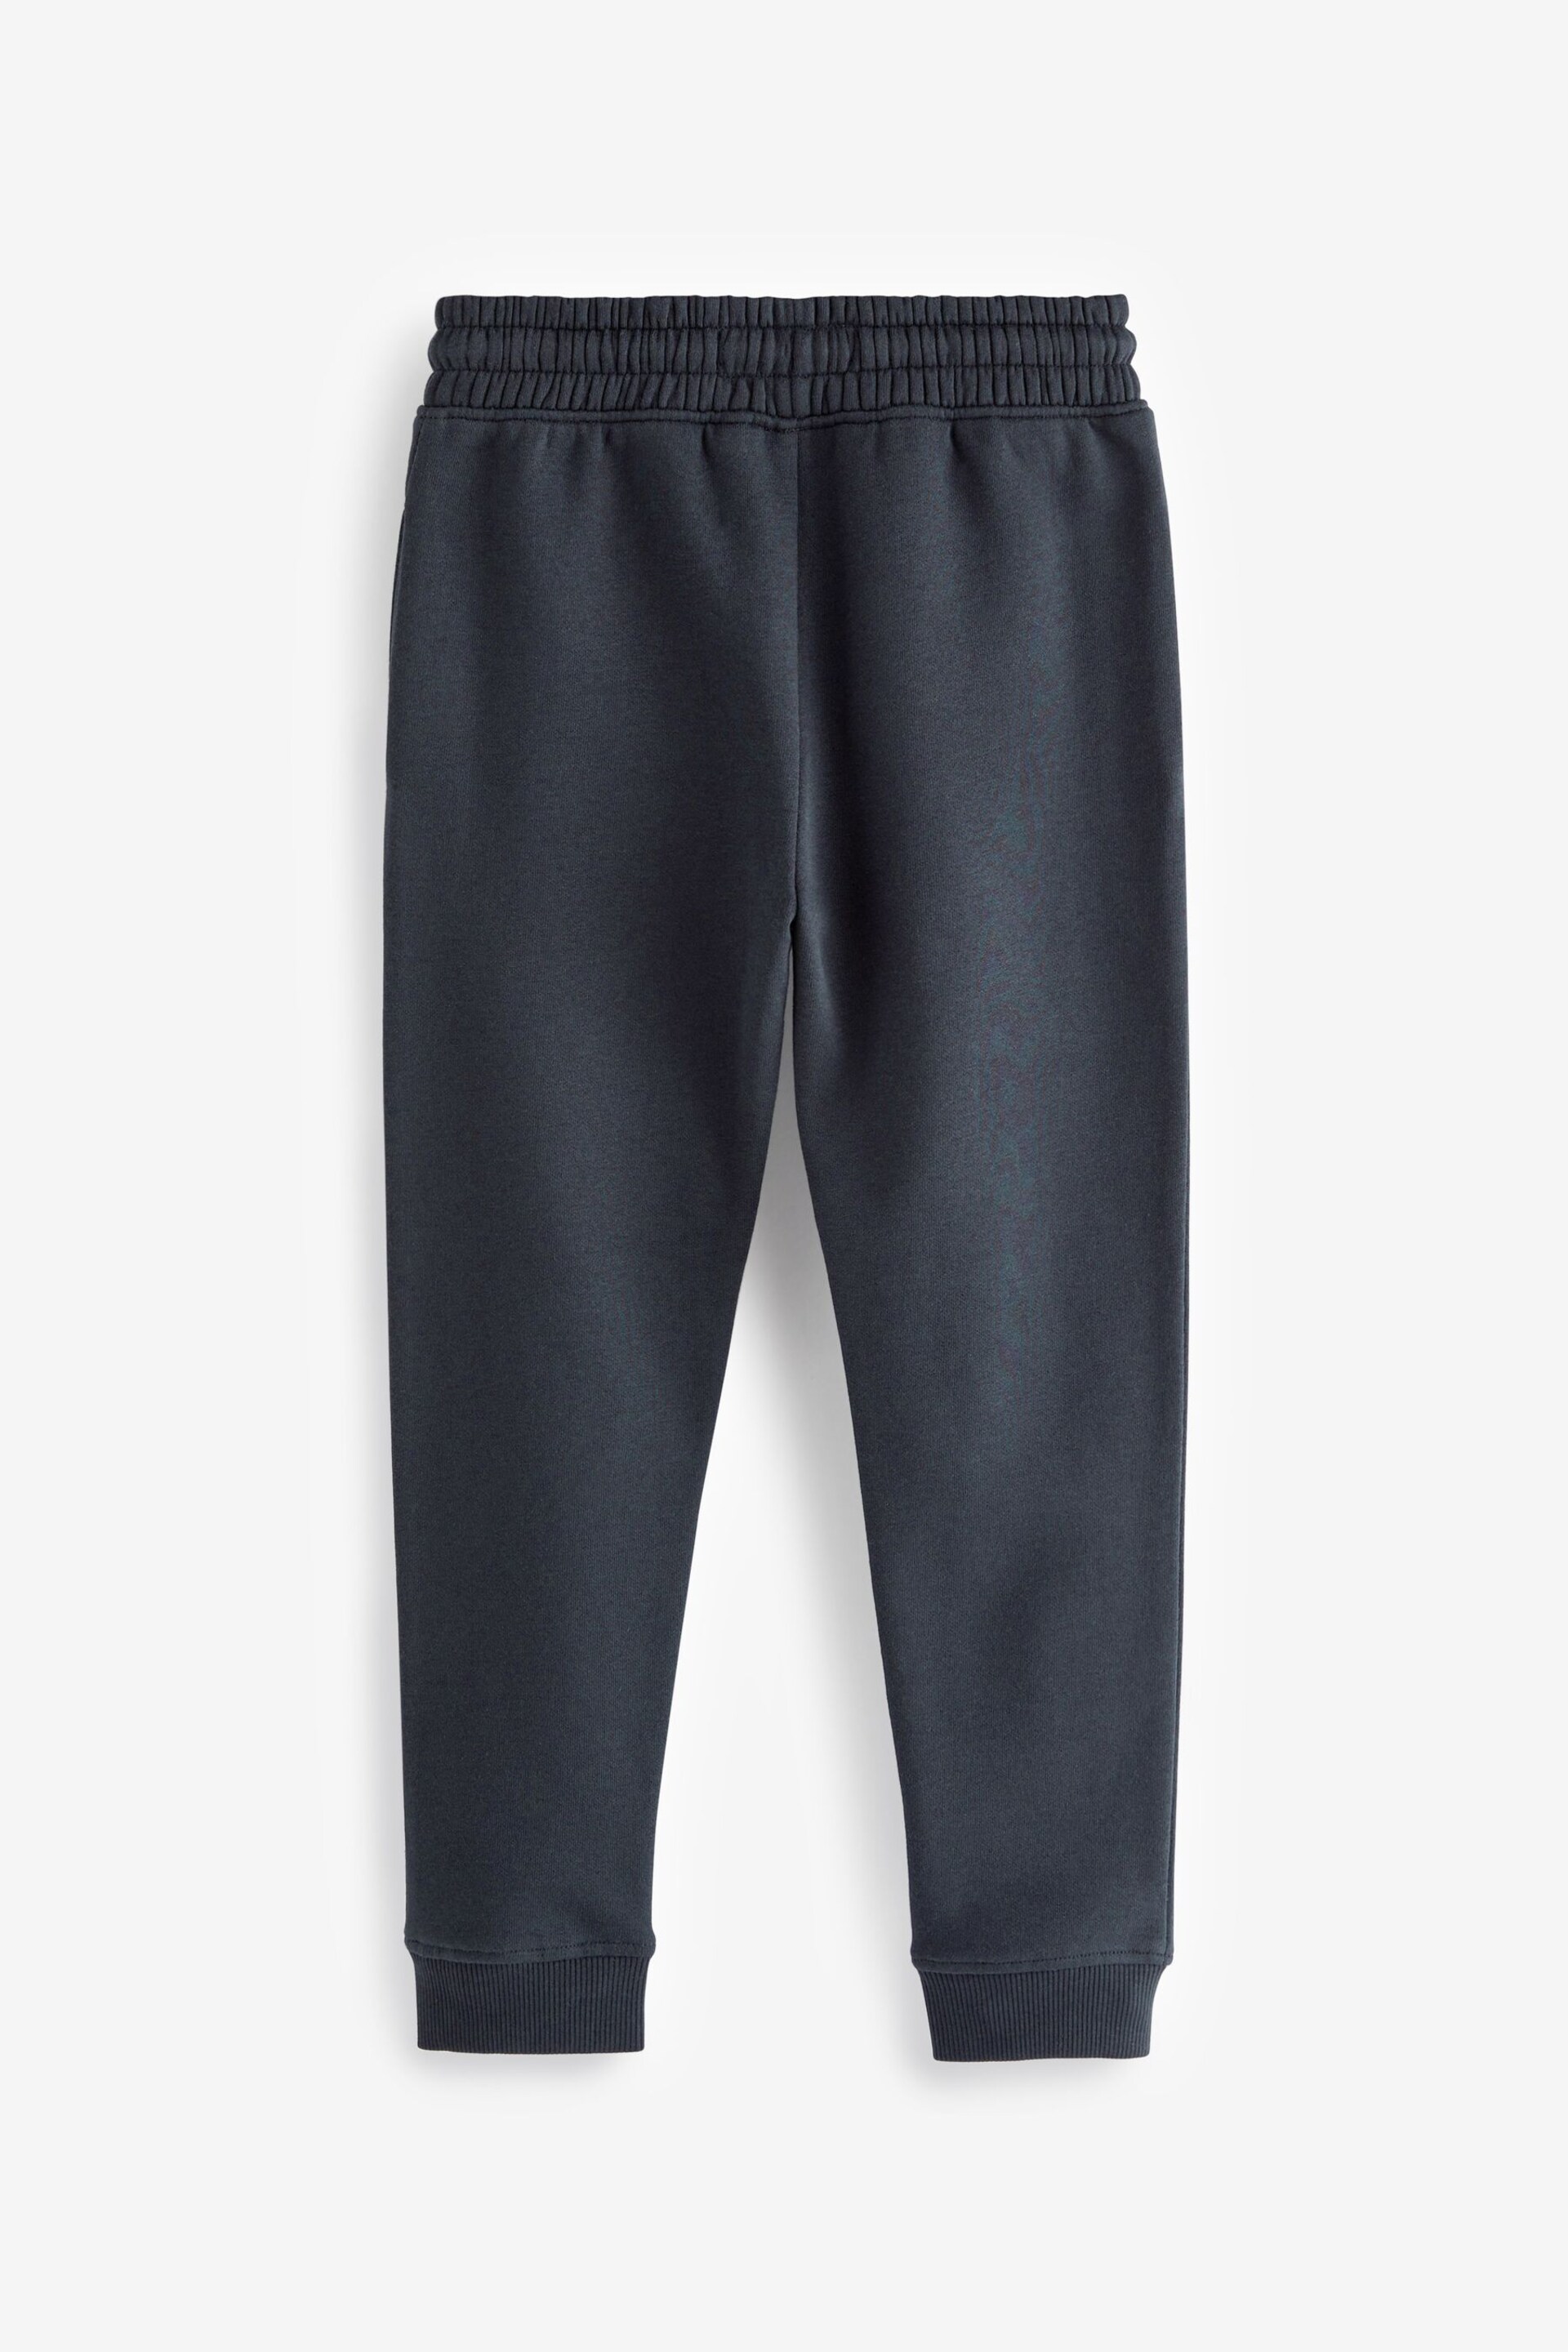 Navy/Blue Skinny Fit Cuffed Joggers (3-16yrs) - Image 2 of 3